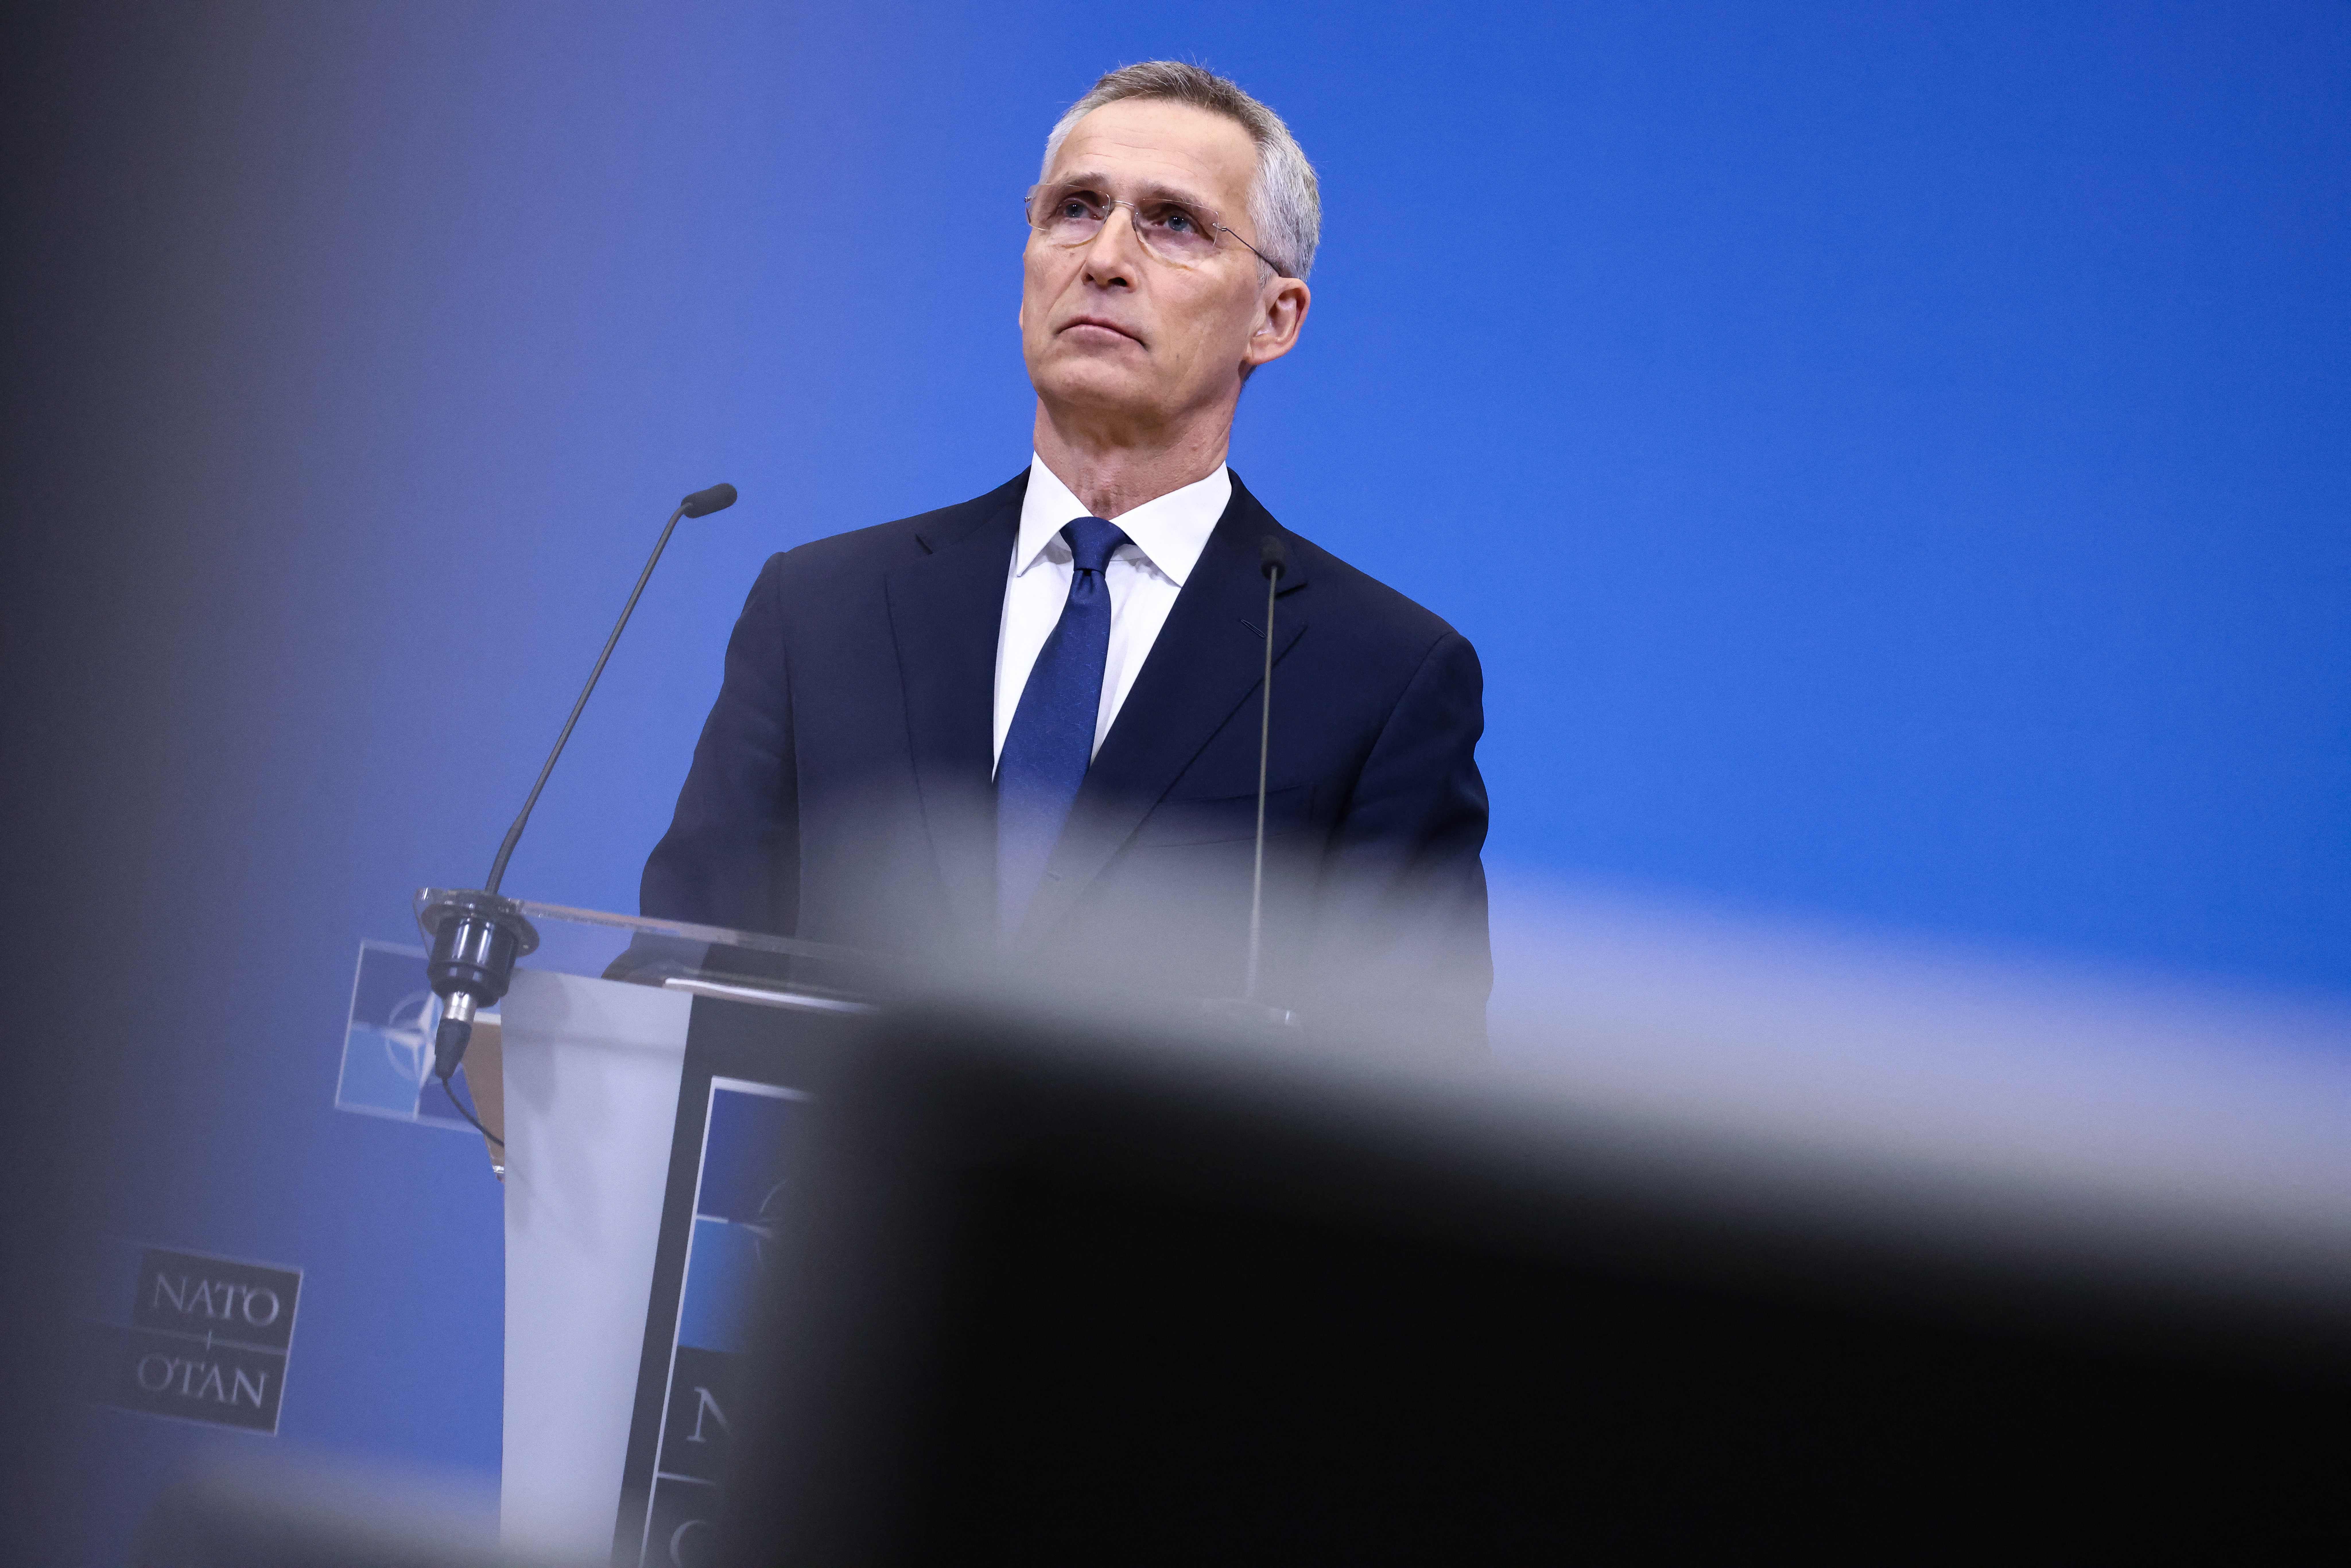 NATO General Secretary Jens Stoltenberg speaks during a press conference to present North Atlantic Treaty Organization (NATO)'s Annual Report for 2021 at the NATO headquarters in Brussels, Belgium, on March 31, 